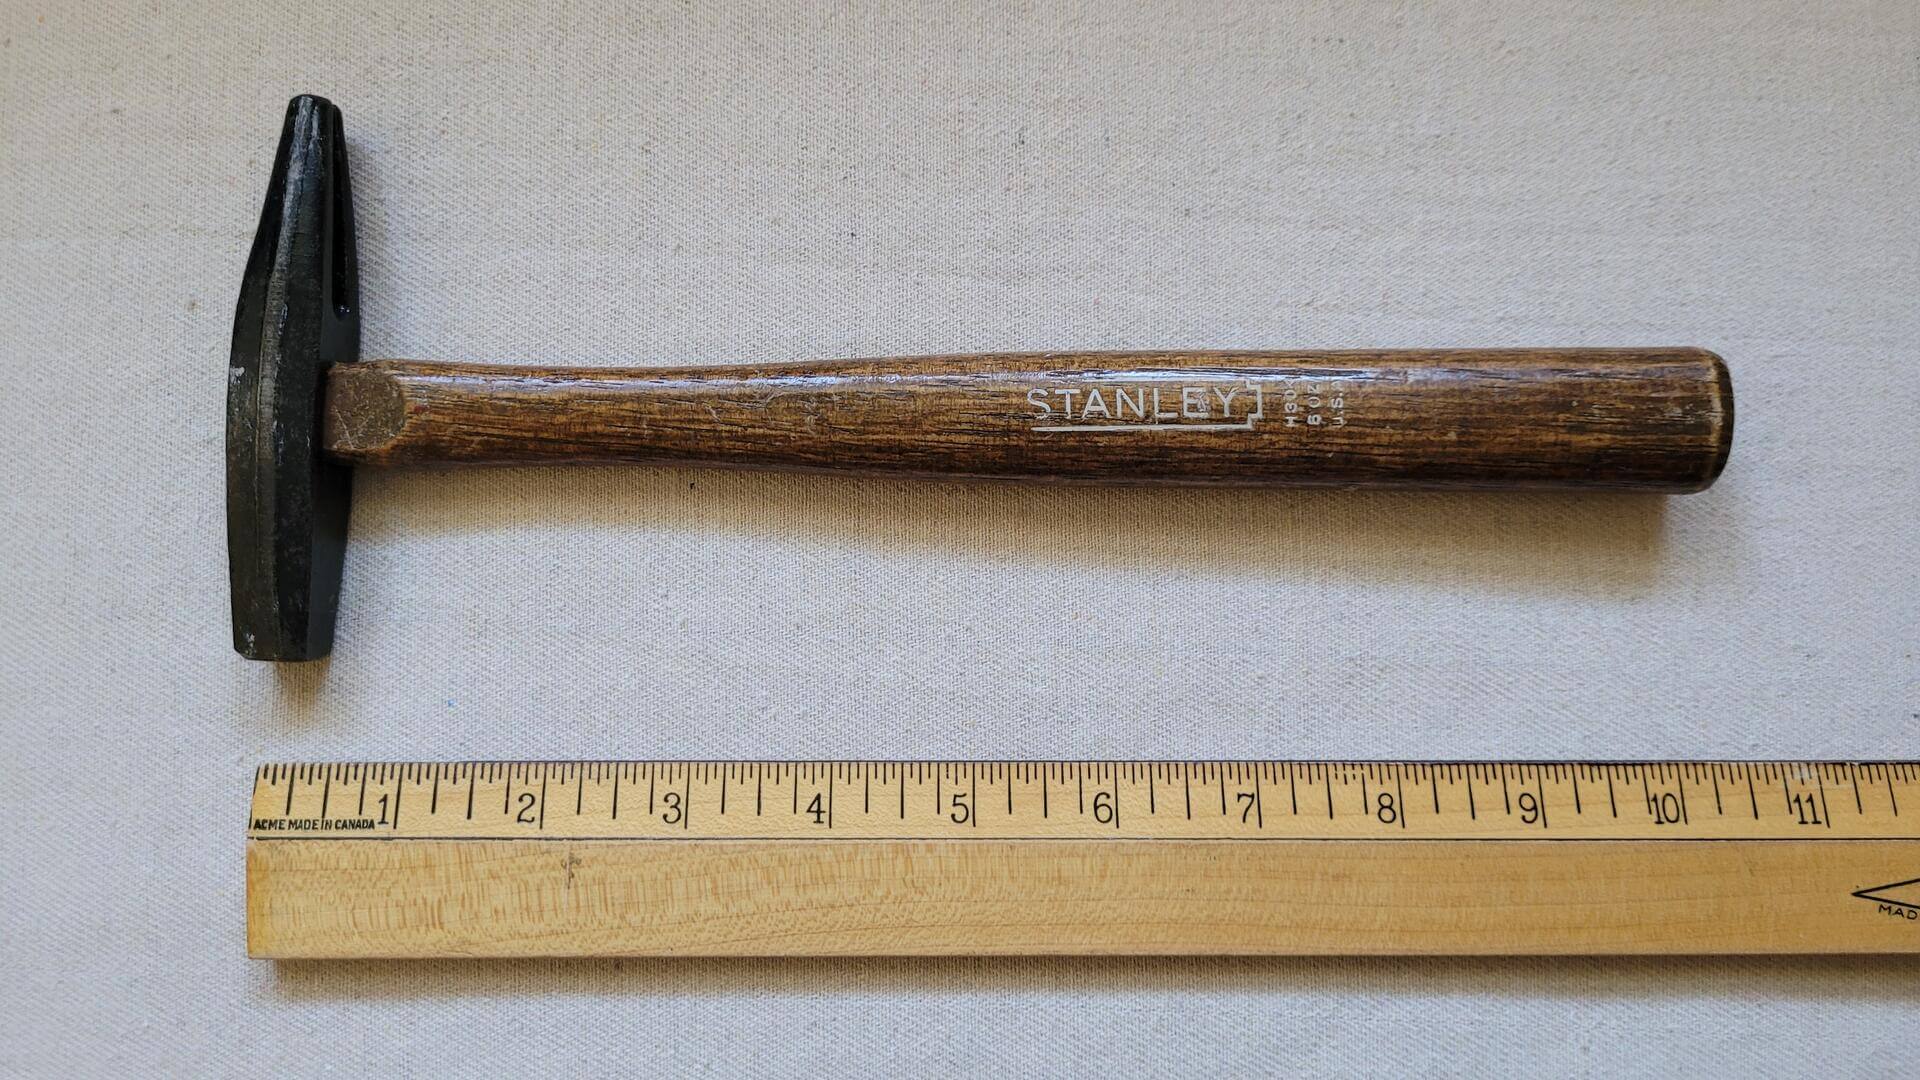 Vintage Stanley upholstery tack hammer 6oz with beautiful wooden handle and the square eye at one end and the split round eye at the other end. Antique made in USA collectible hand tool 10.5 inches in length